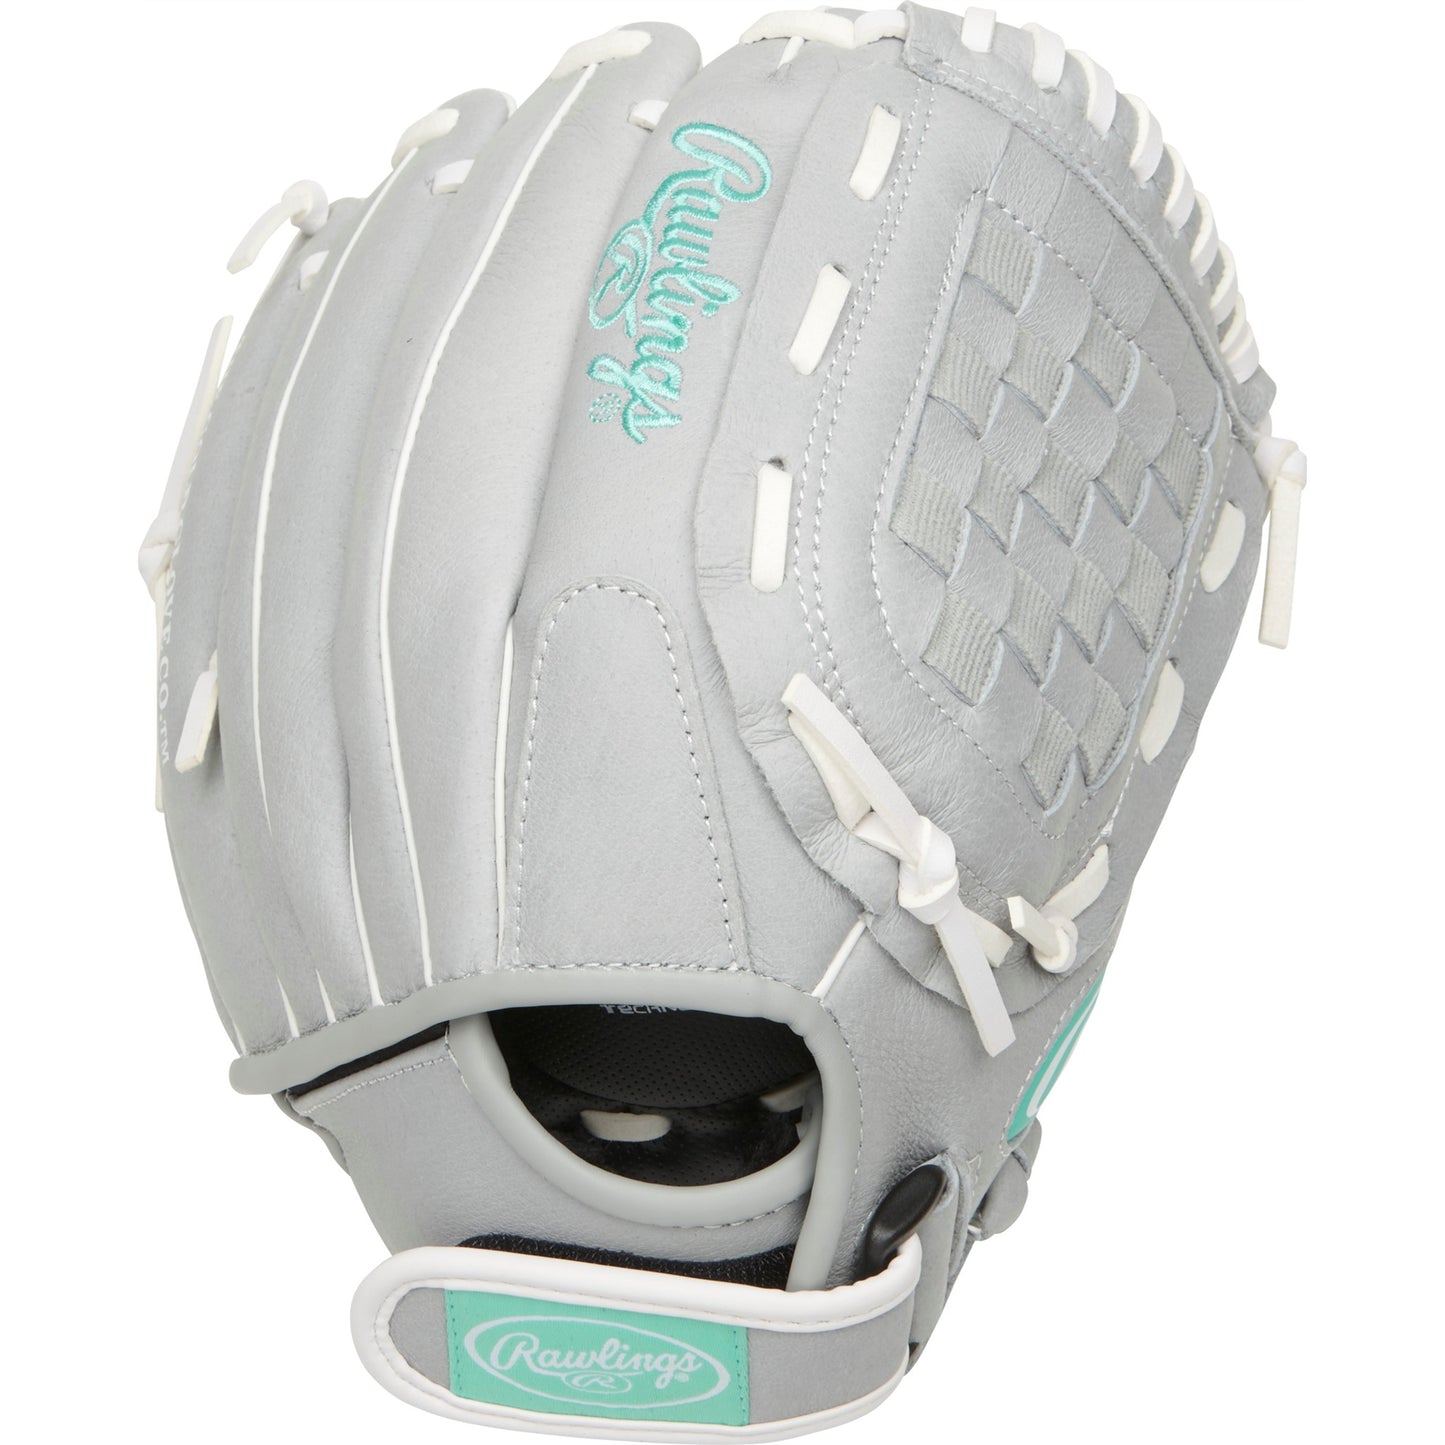 Rawlings (SCSB115M) Sure Catch Series 11.5" Youth Softball Glove